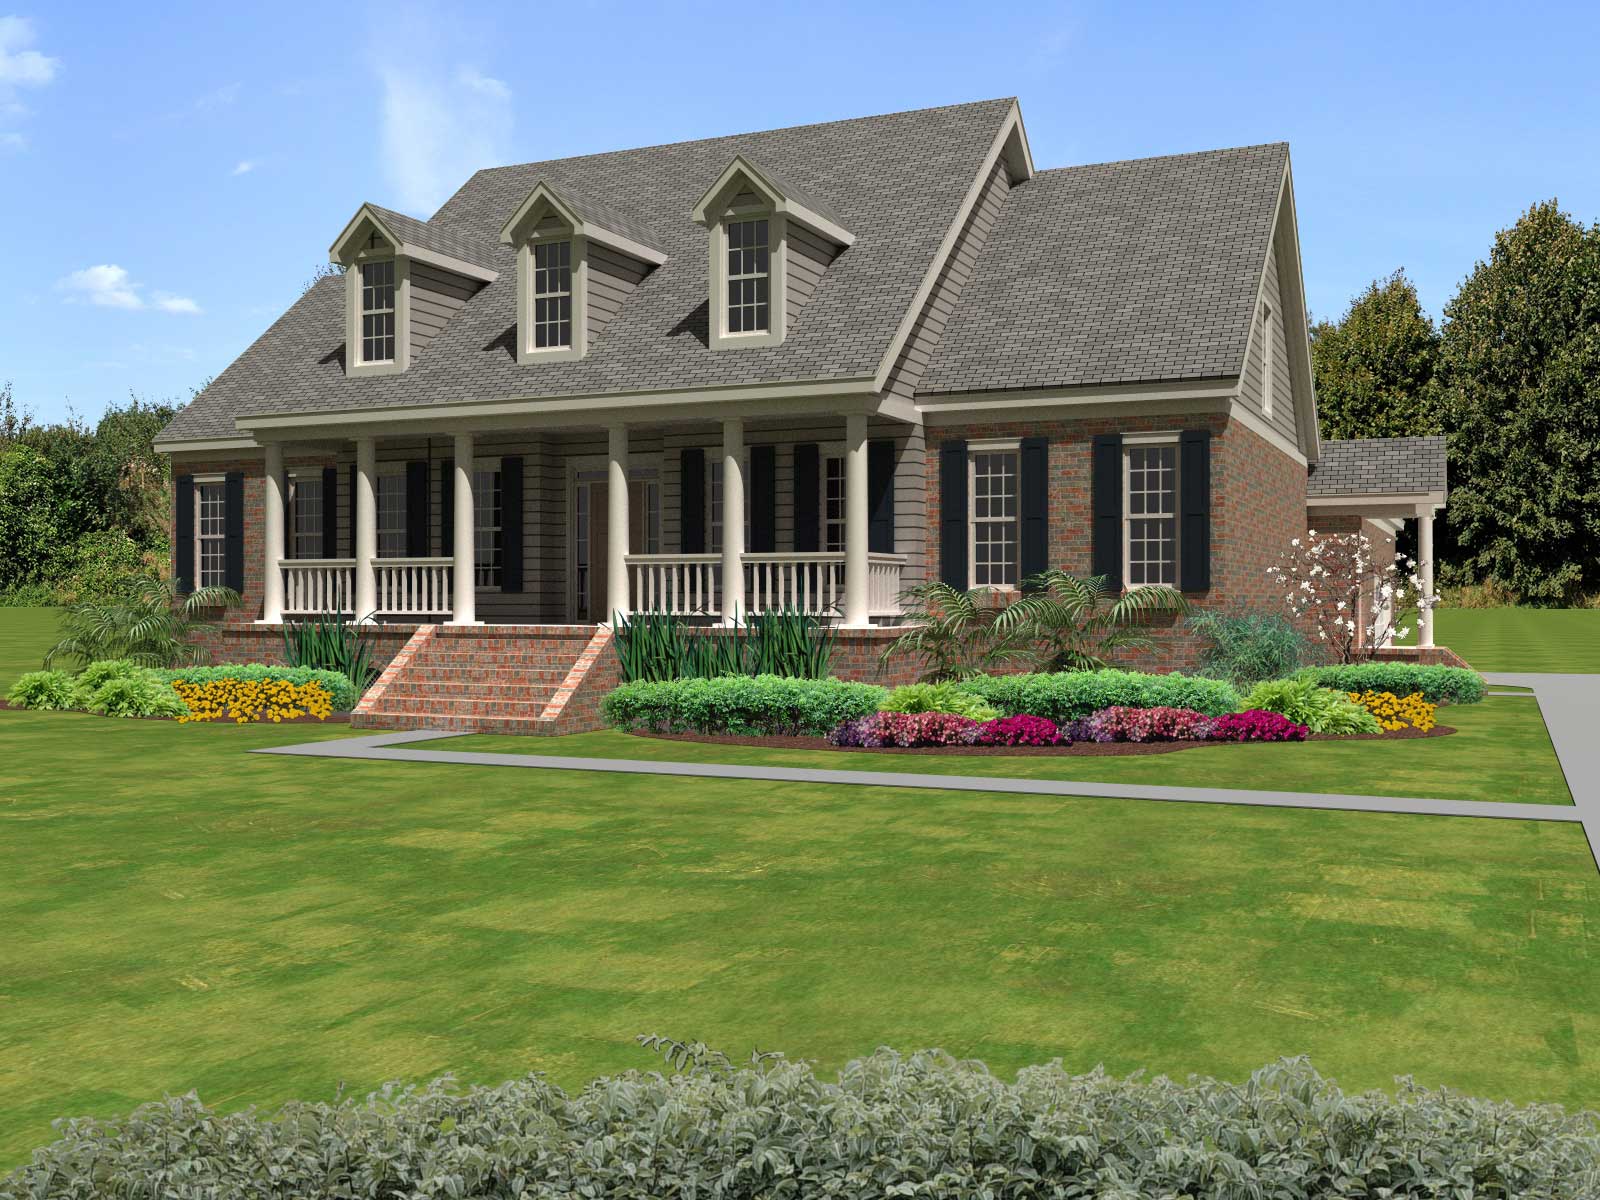 Cap Cod / Country House Plan - 4 bed, 3659 sq. ft. Home Plan #170-1200